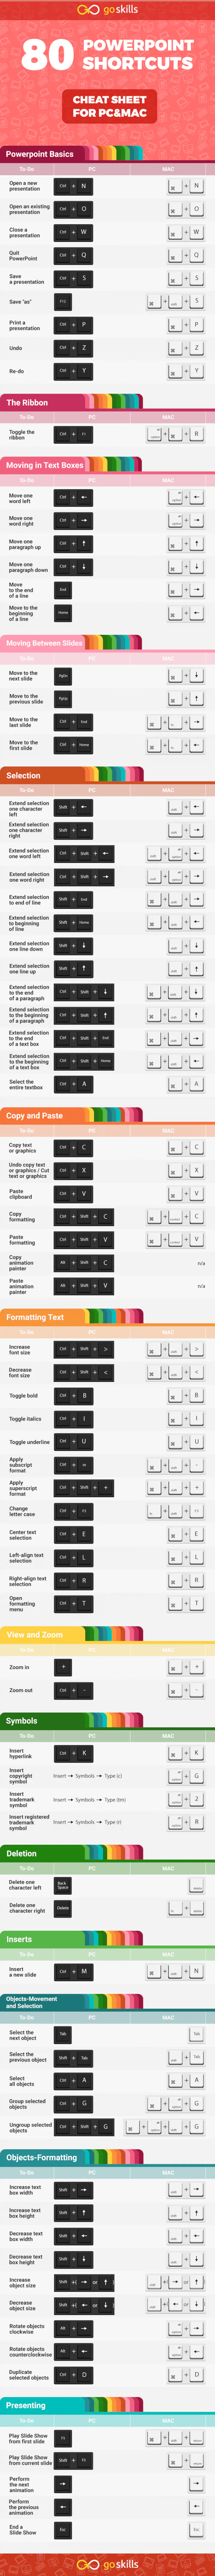 powerpoint-shortcuts-infographic-goskills